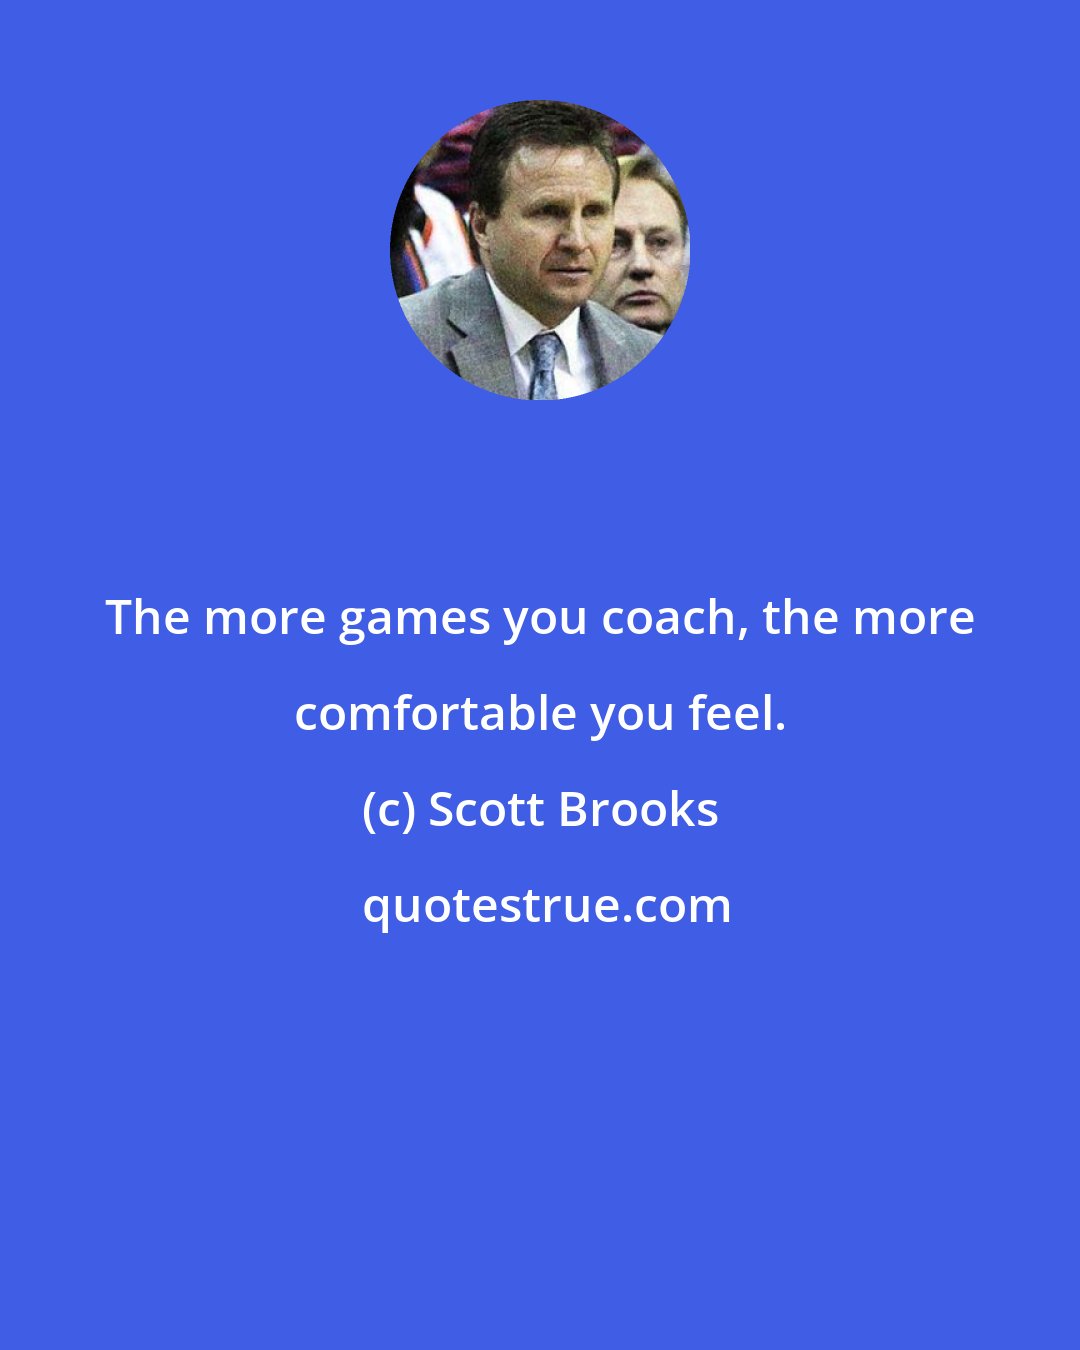 Scott Brooks: The more games you coach, the more comfortable you feel.